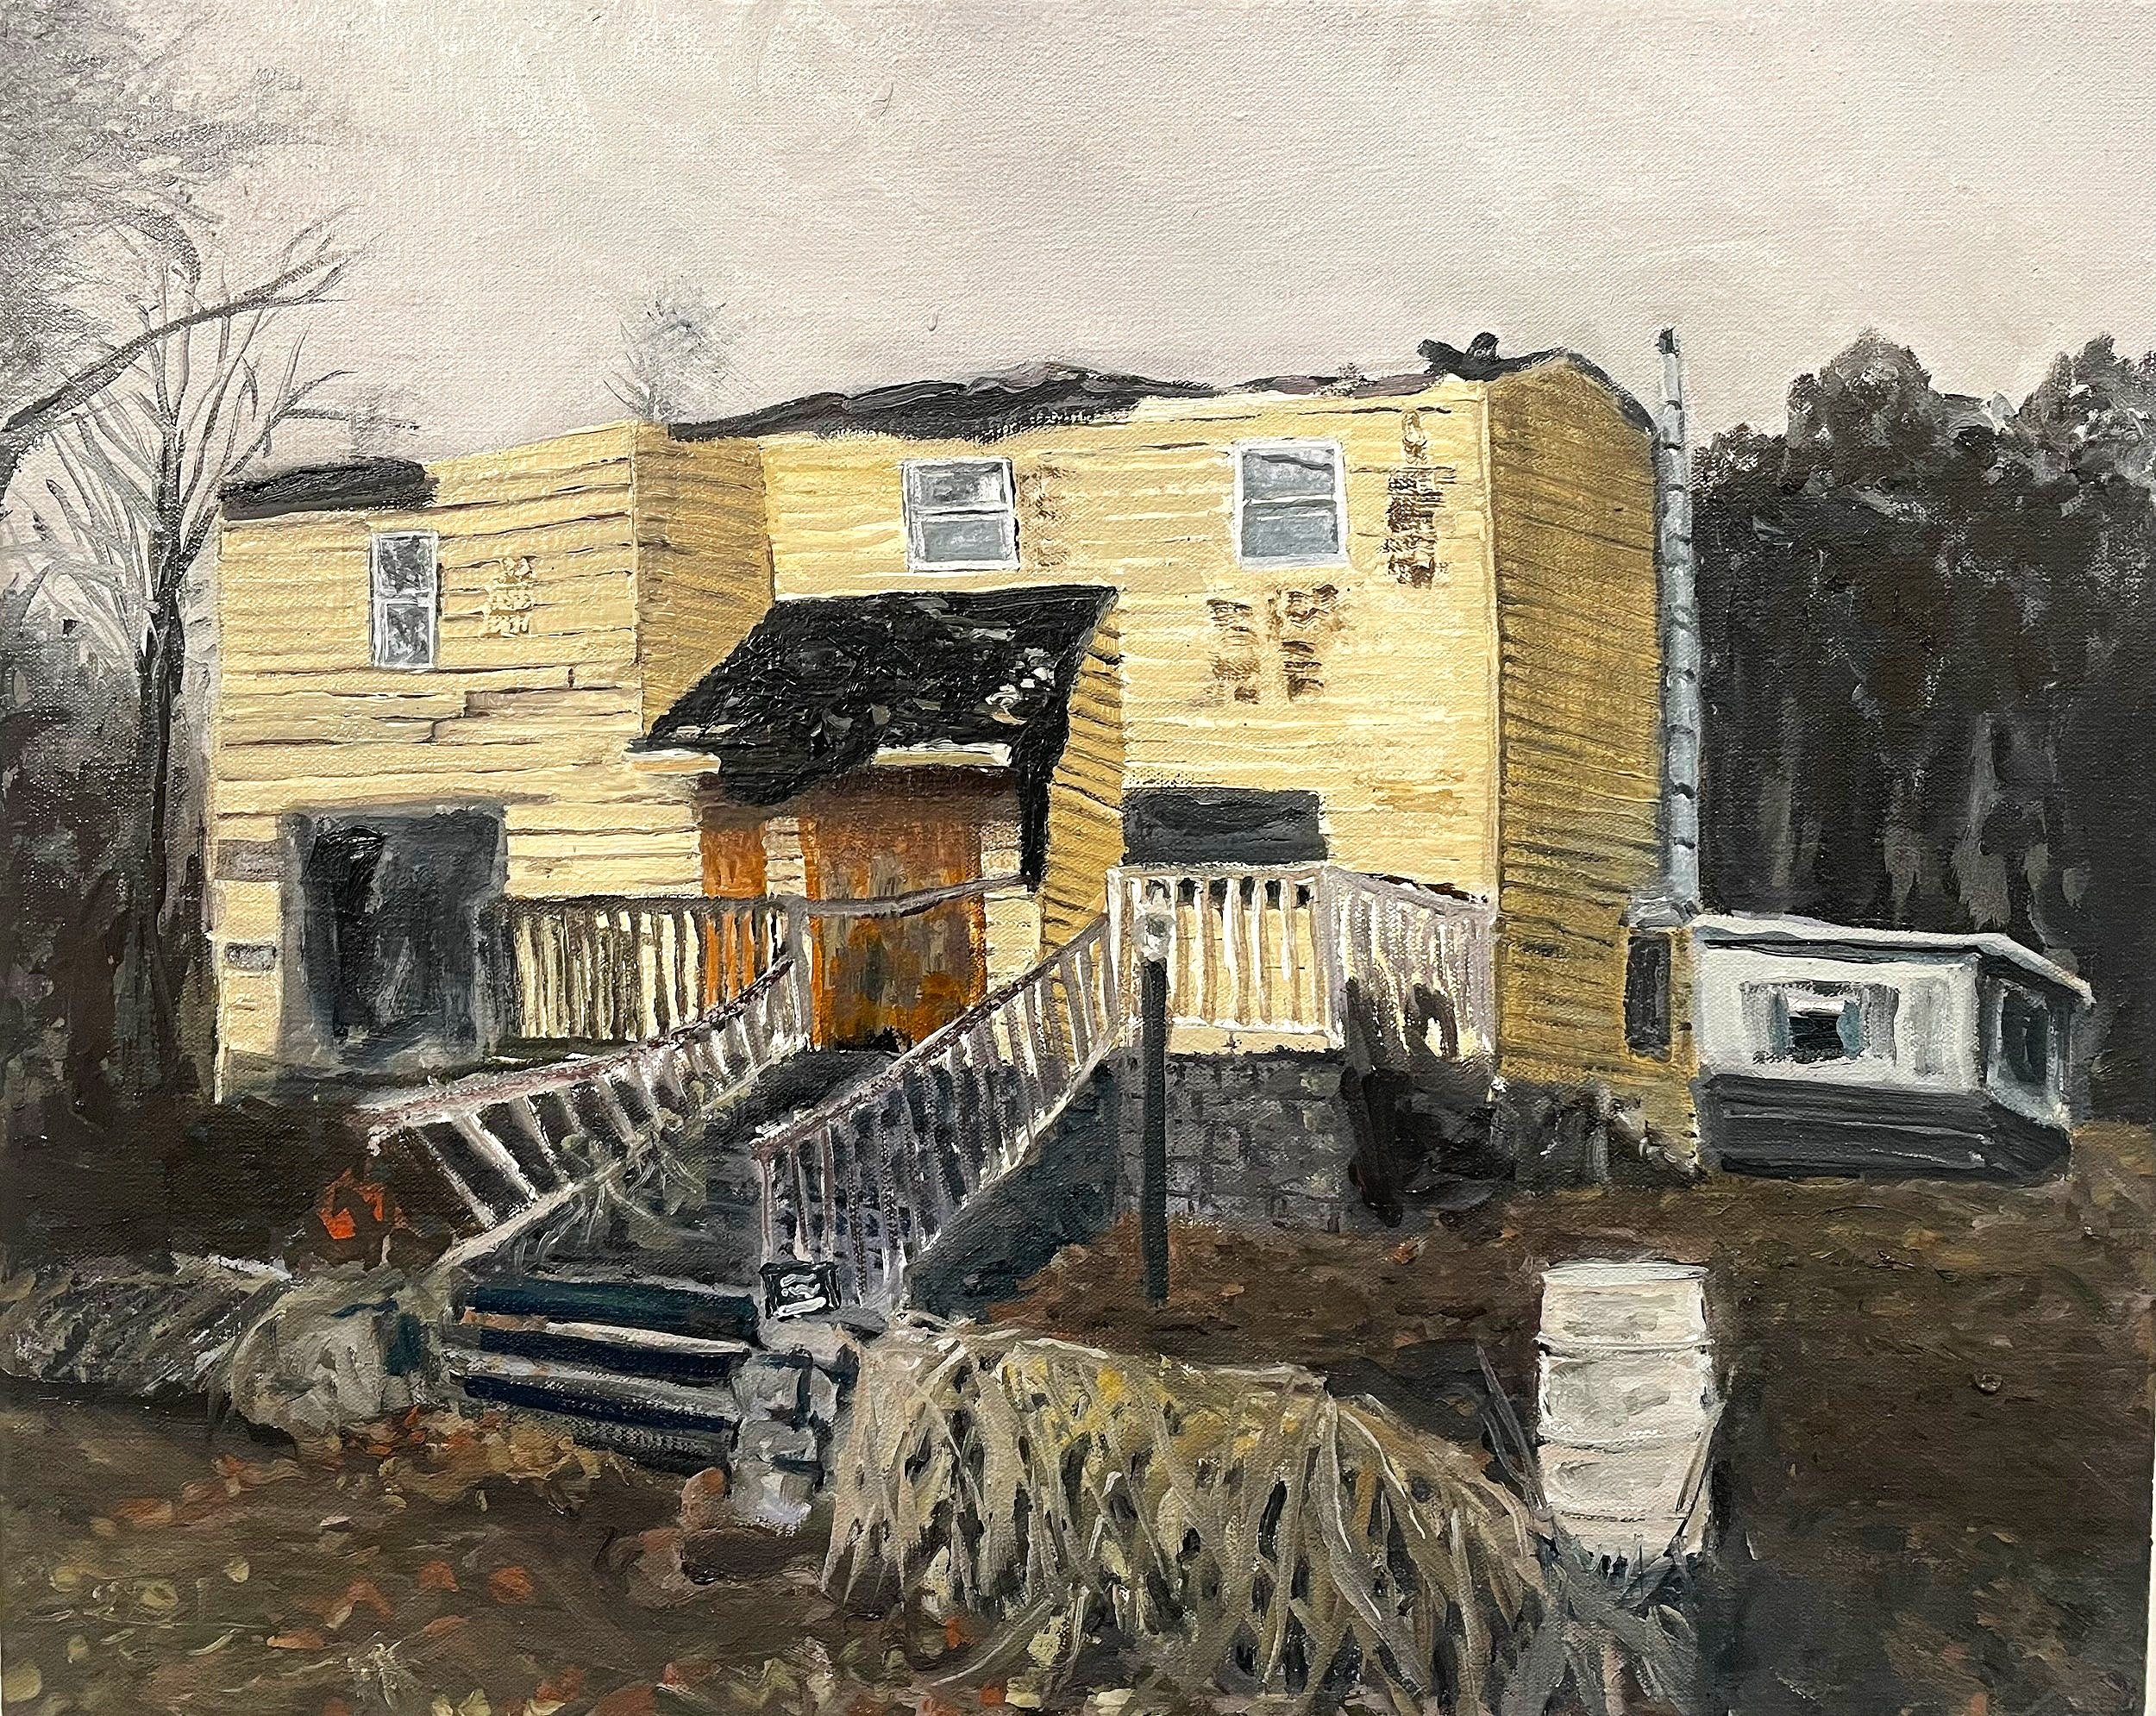   Abandoned Home on Patria,  Oil on Canvas, 16” x 20”, 2021 - 2022 